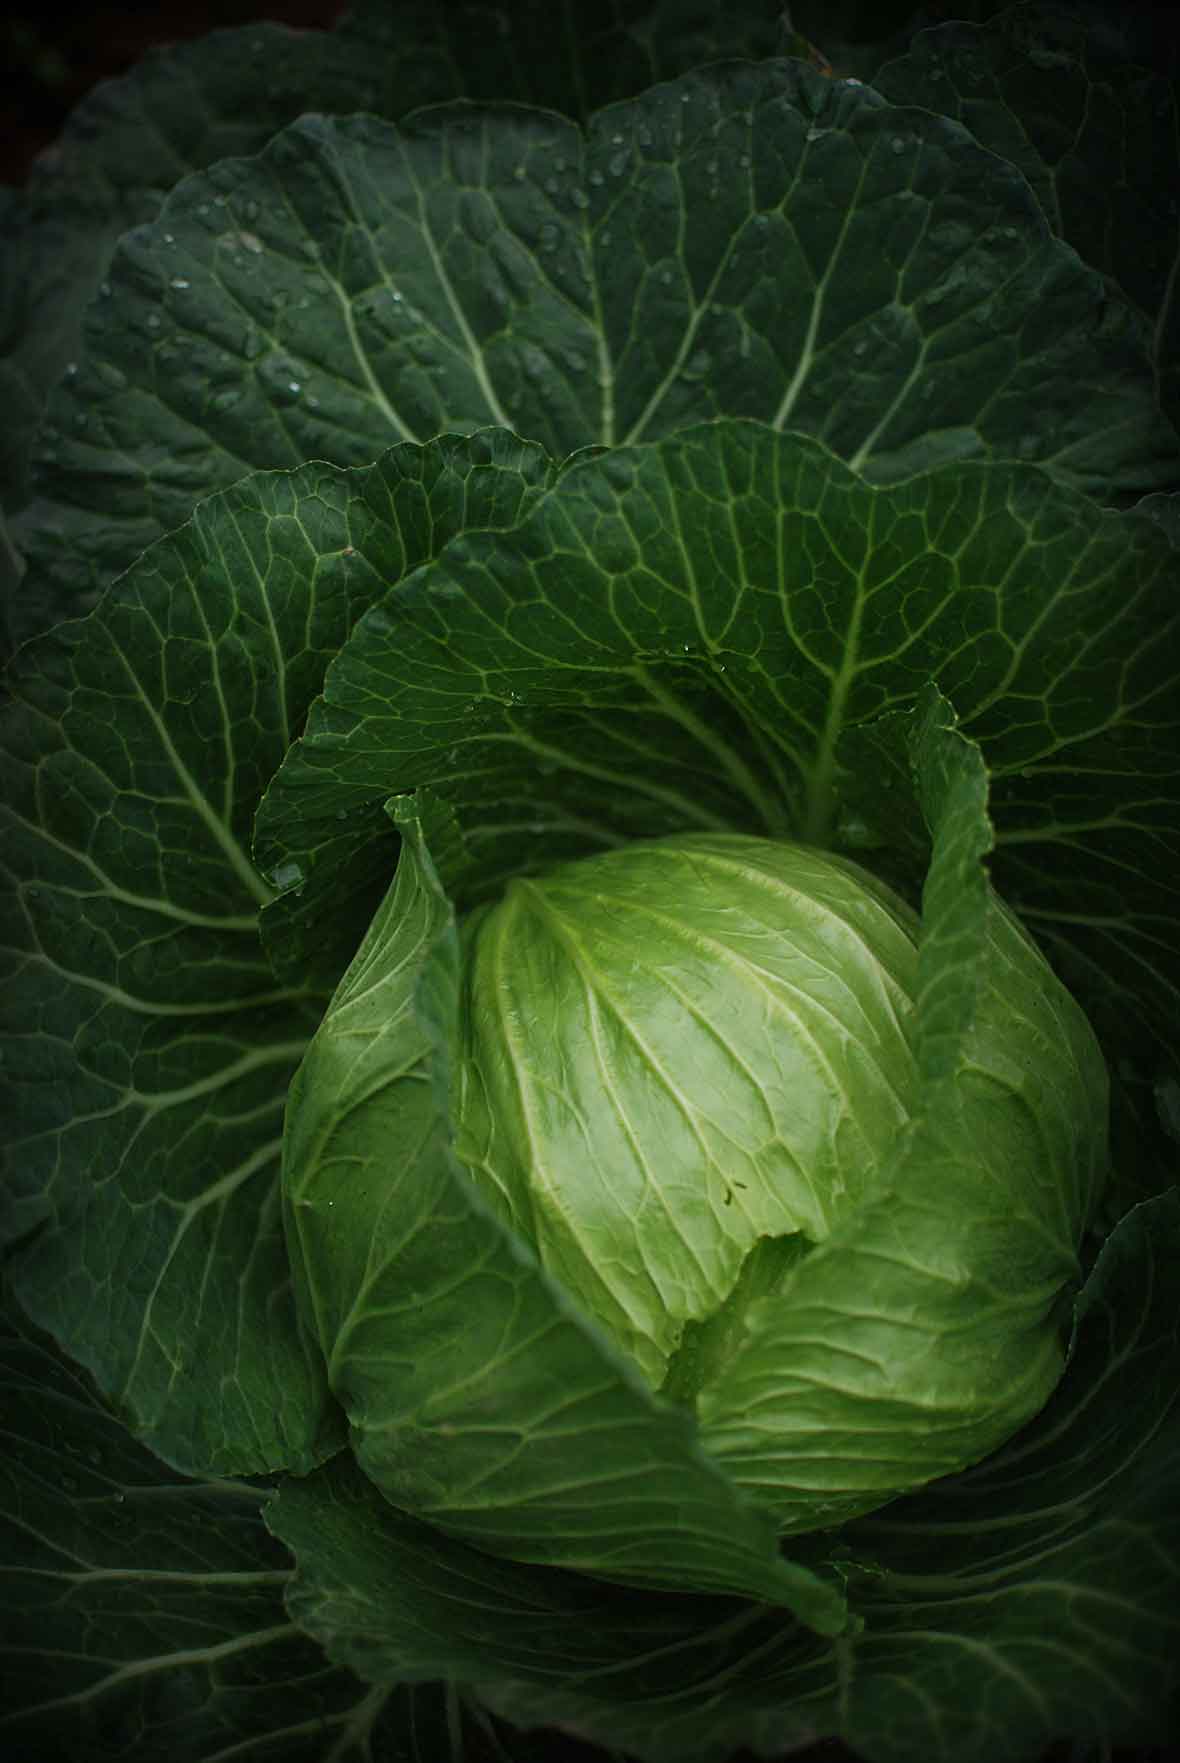 A close-up of a large, deep green cabbage.